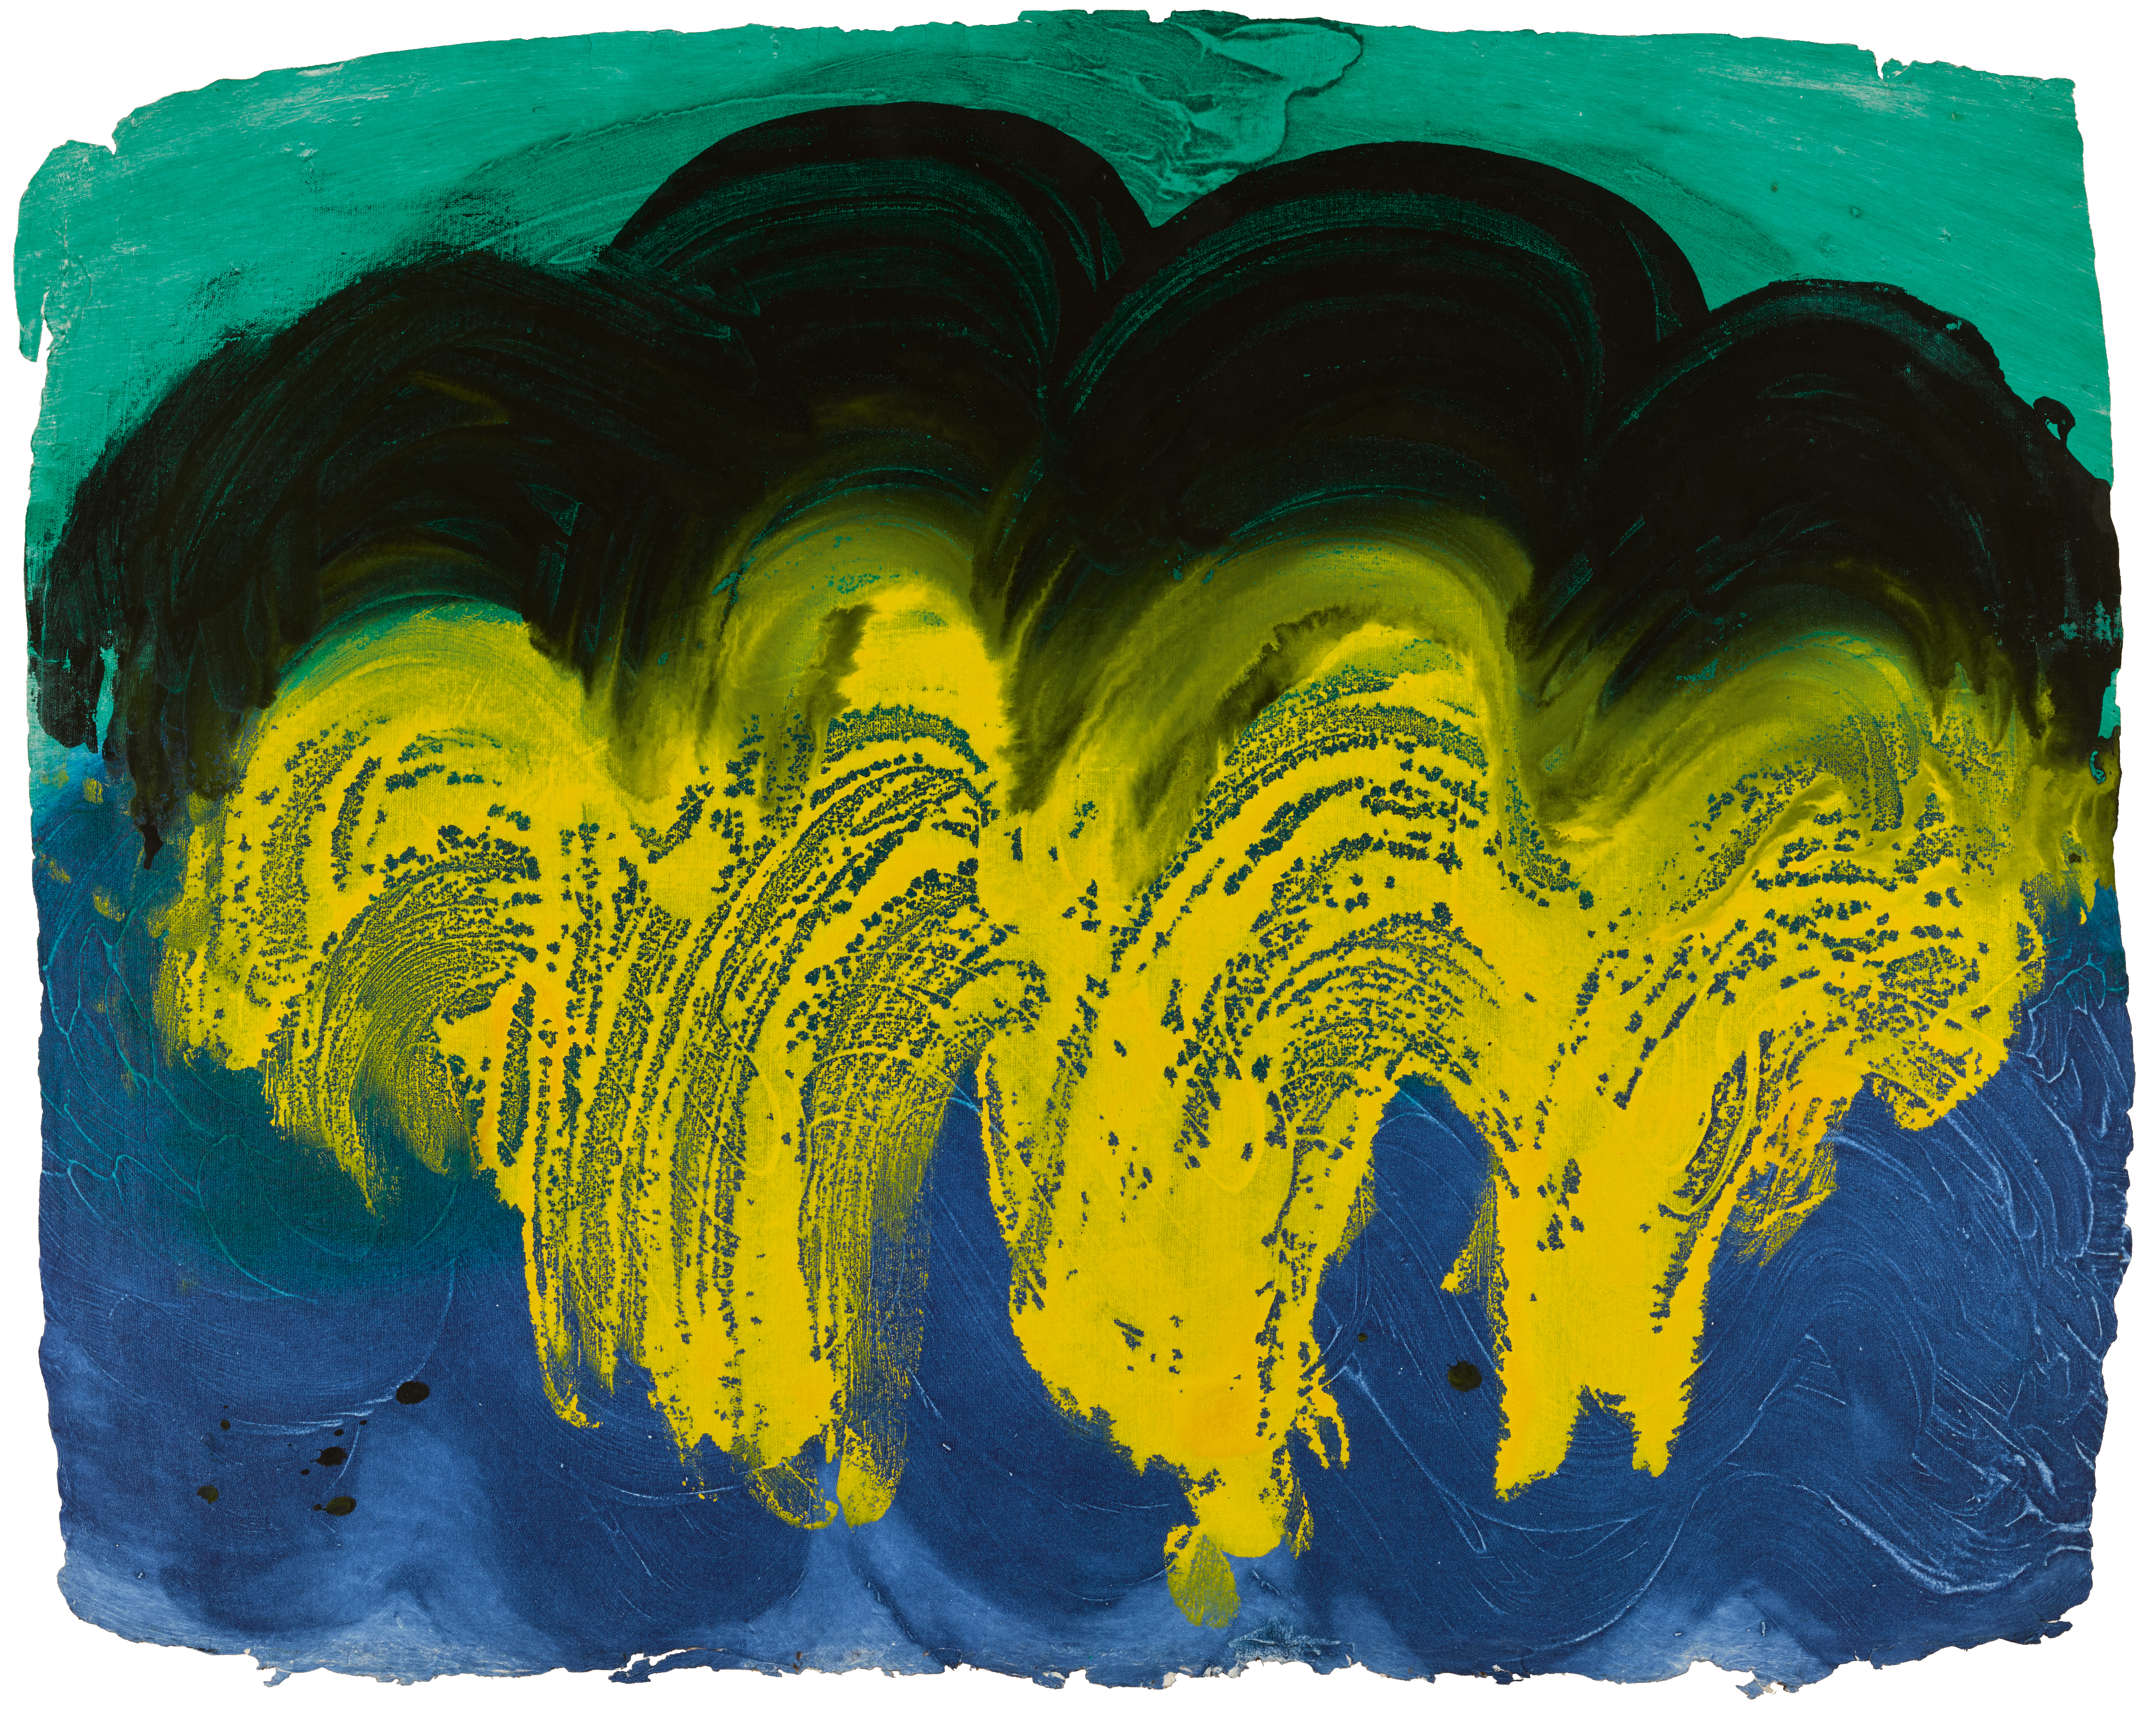 Howard Hodgkin, Indian Waves No. 32, hand painted gouache on intaglio-impressed Khadi paper (Sotheby's)